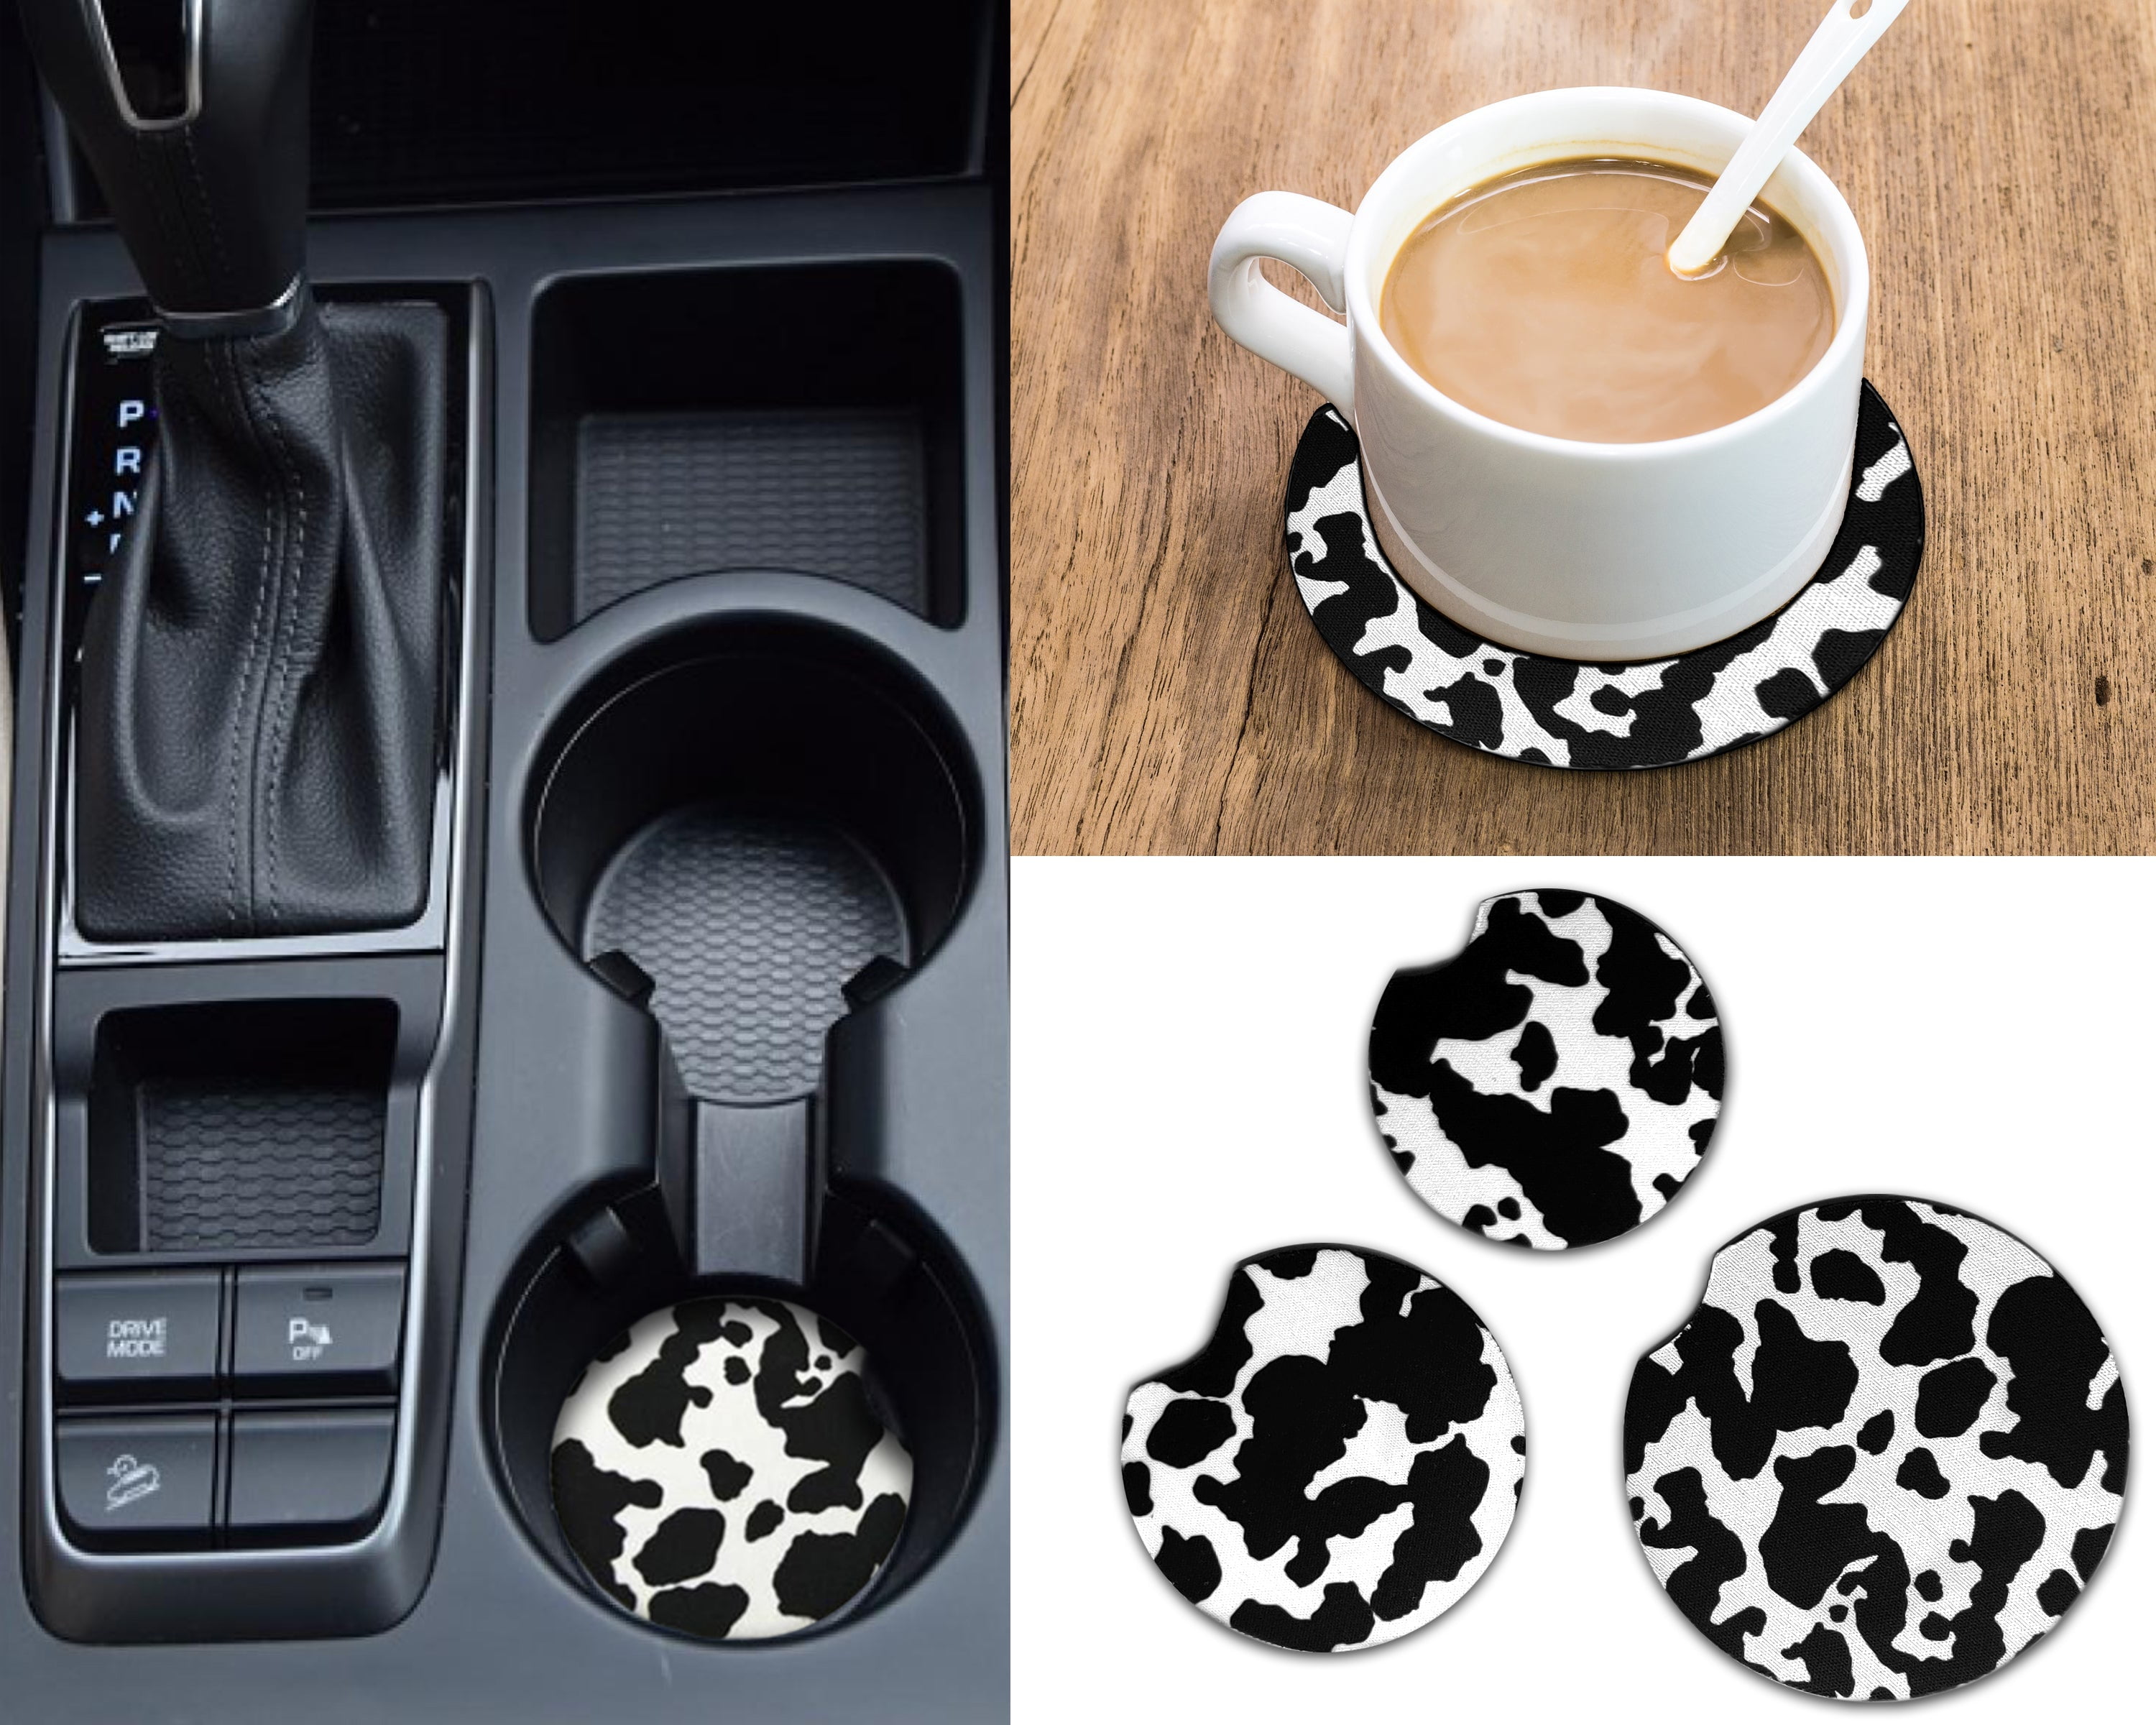 Cow Print Extra Large 3.5 Inch Car Coasters 4 Pack, Absorbent